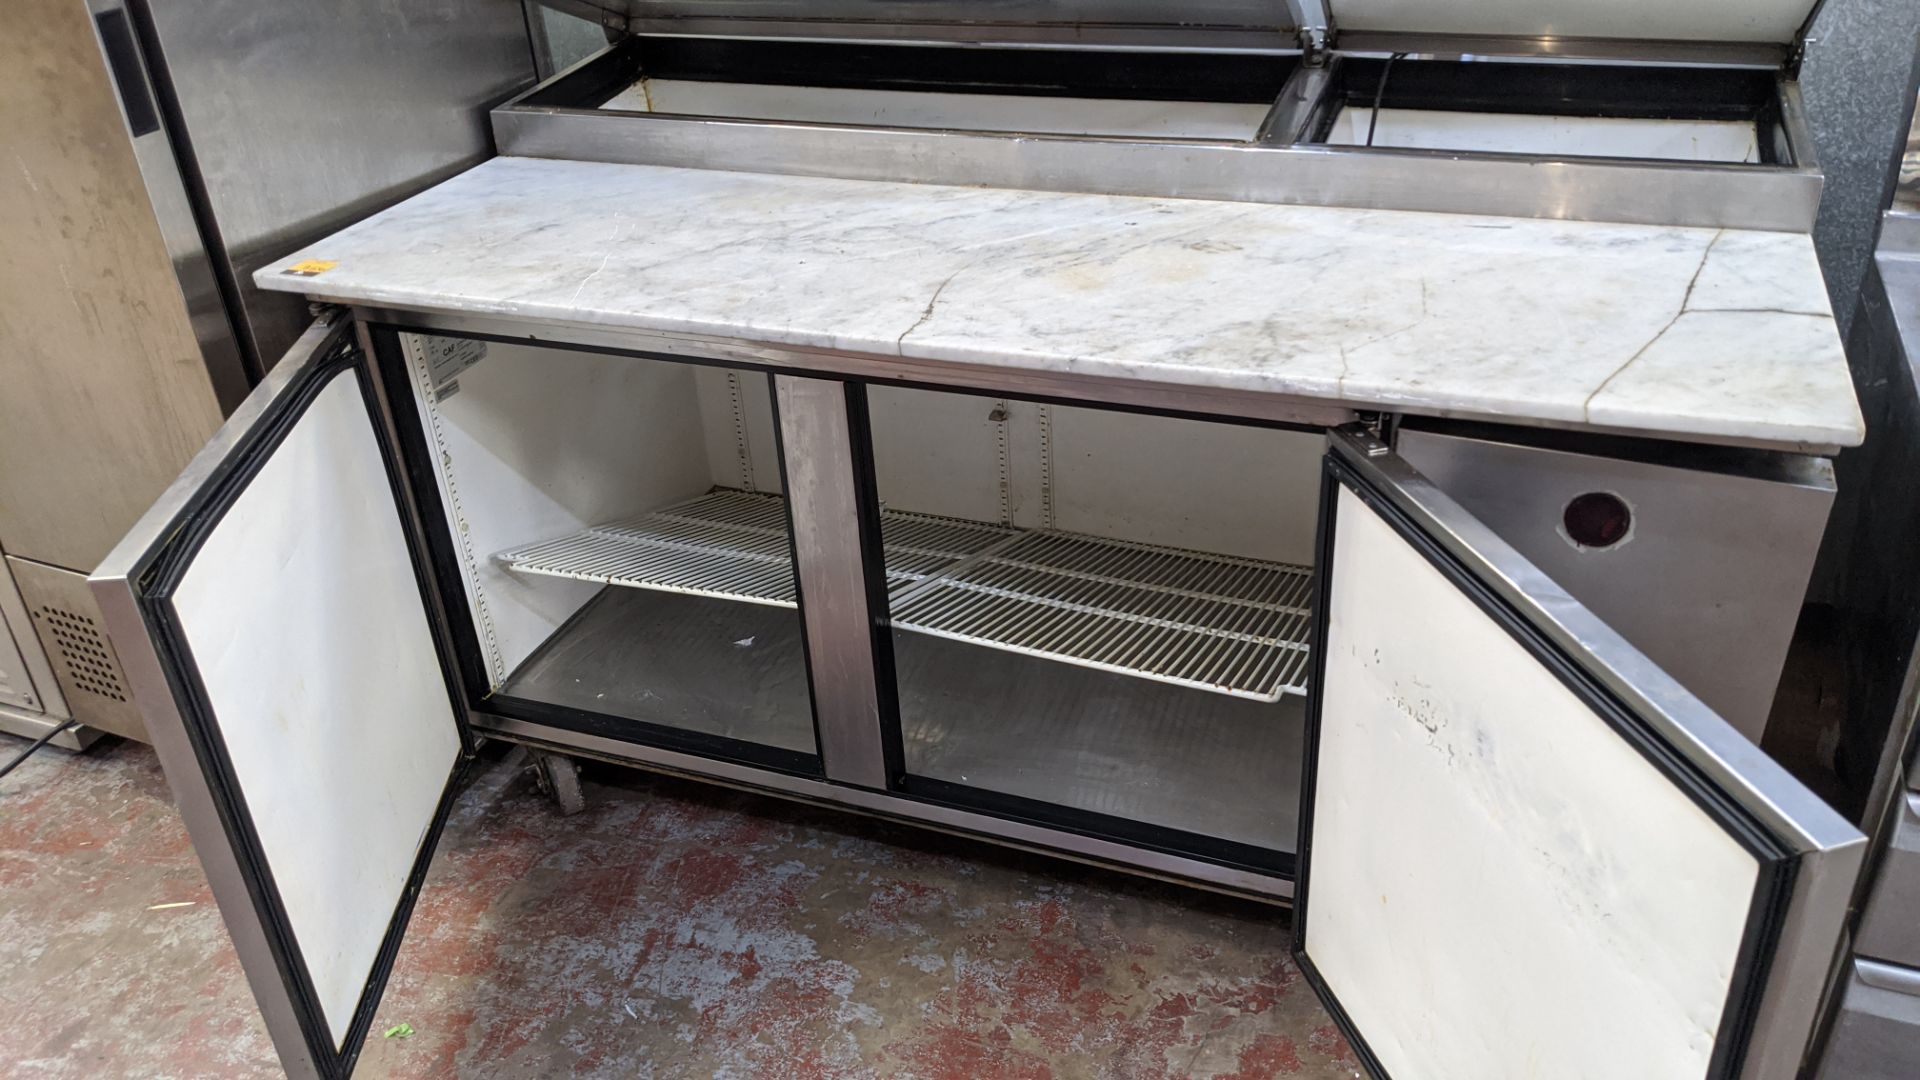 True Refrigeration TPP-67 large twin door stainless steel mobile commercial prep unit with marble ty - Image 6 of 6